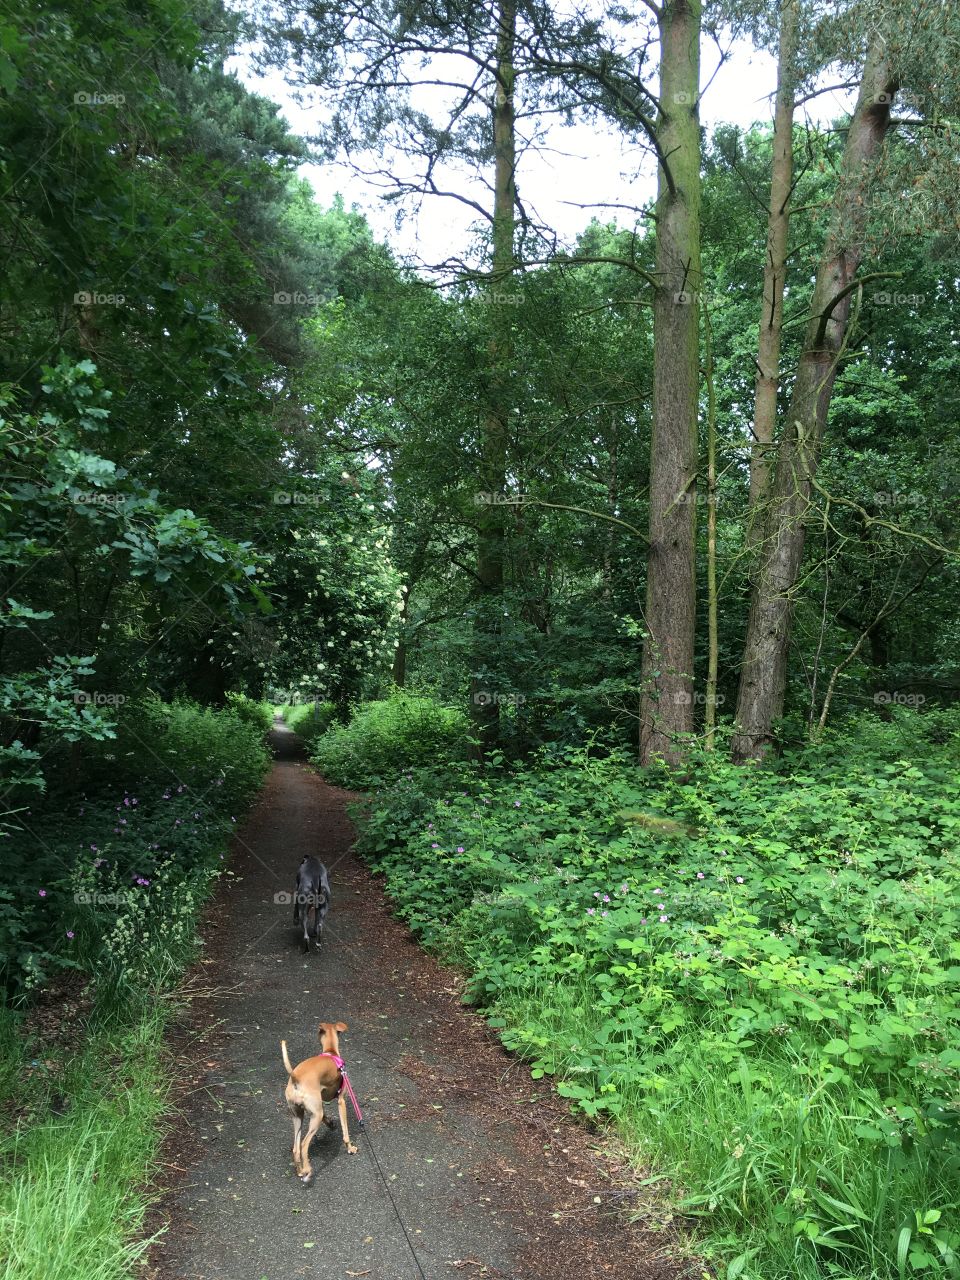 Amber the Italian greyhound and Libby the whippet running on a path in the woods